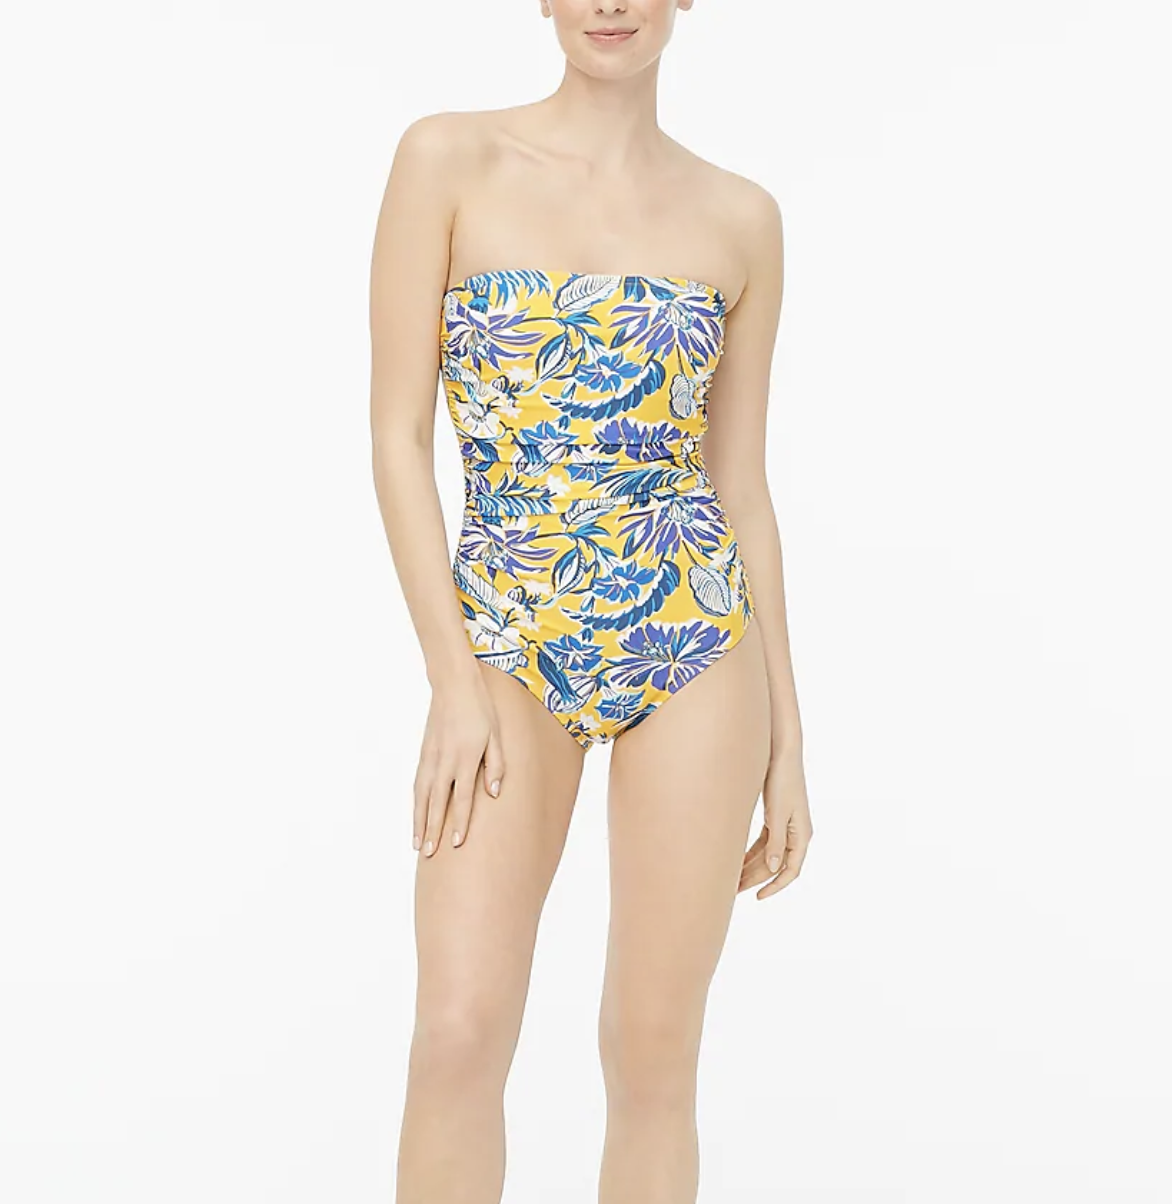 A model wears a  strapless one-piece swimsuit in a floral yellow print